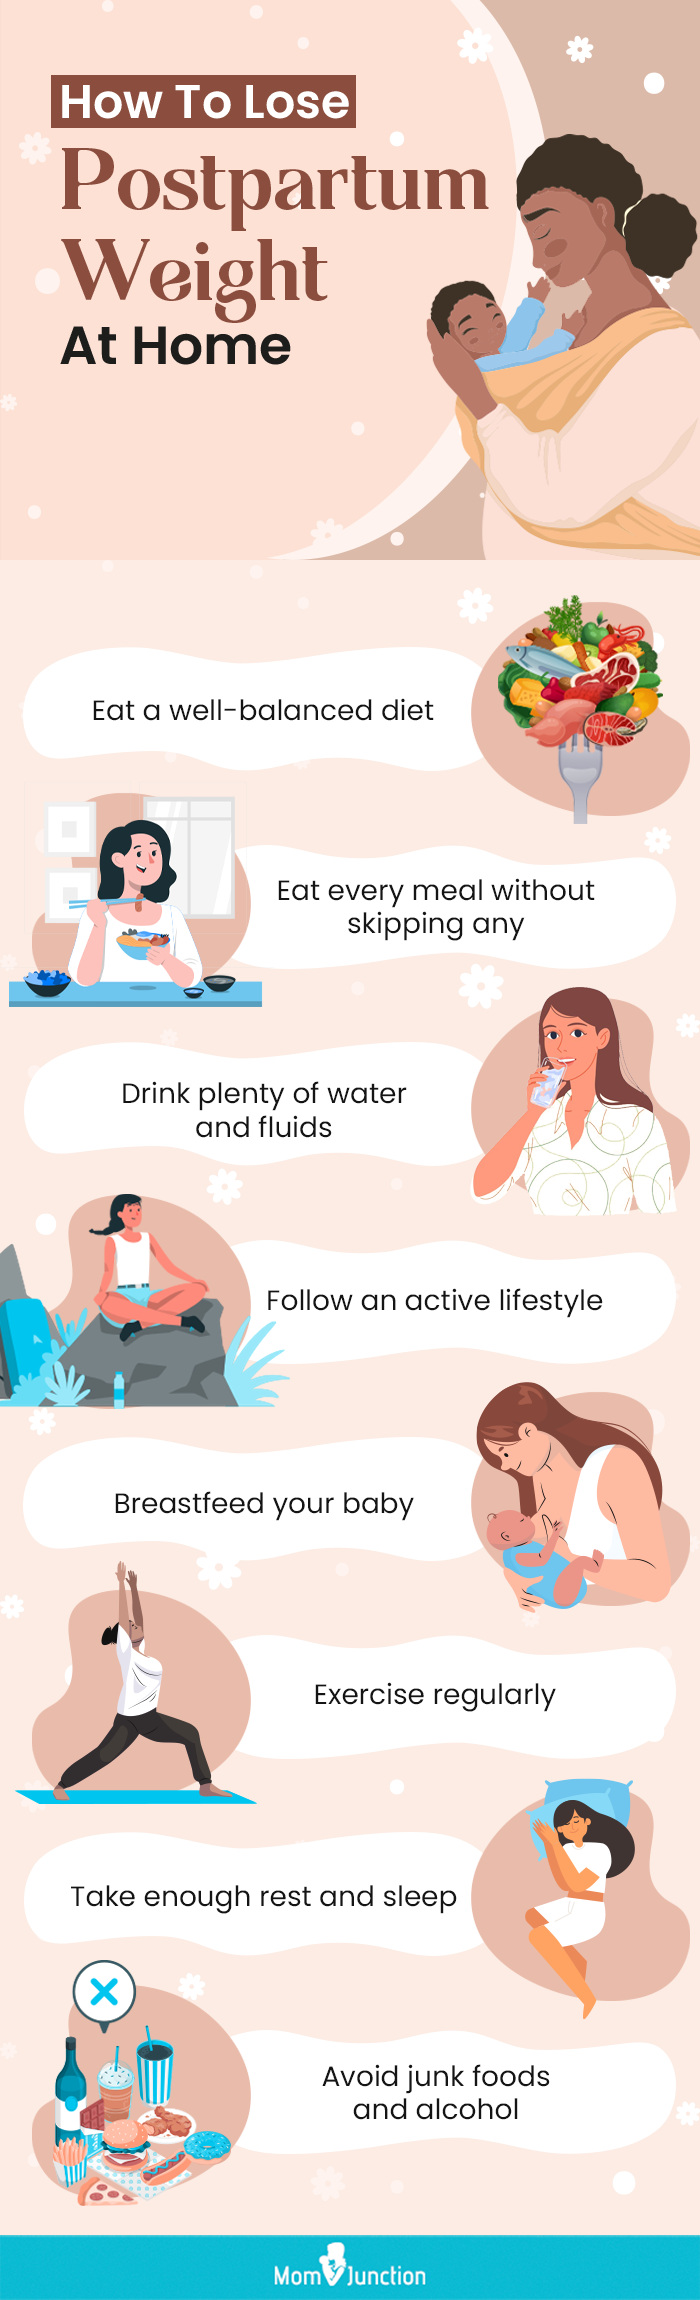 how to lose postpartum weight at home (infographic)